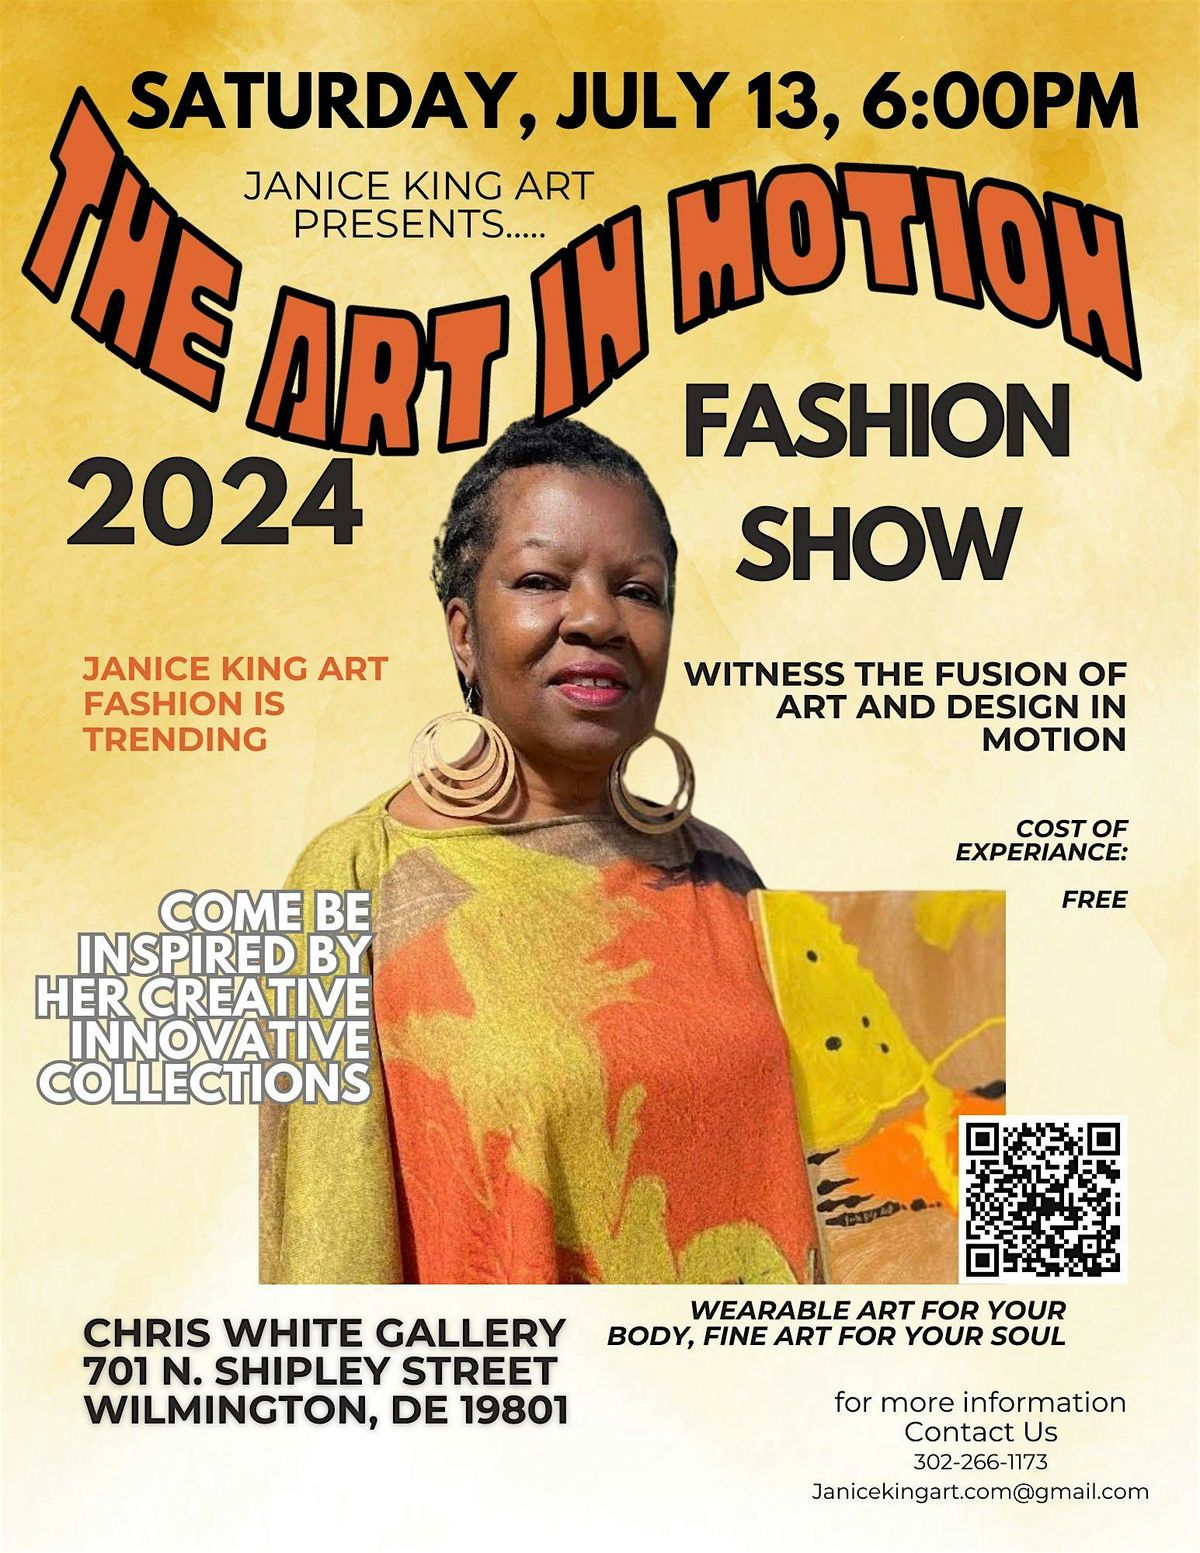 Janice King Art presents The Art in Motion Fashion Show